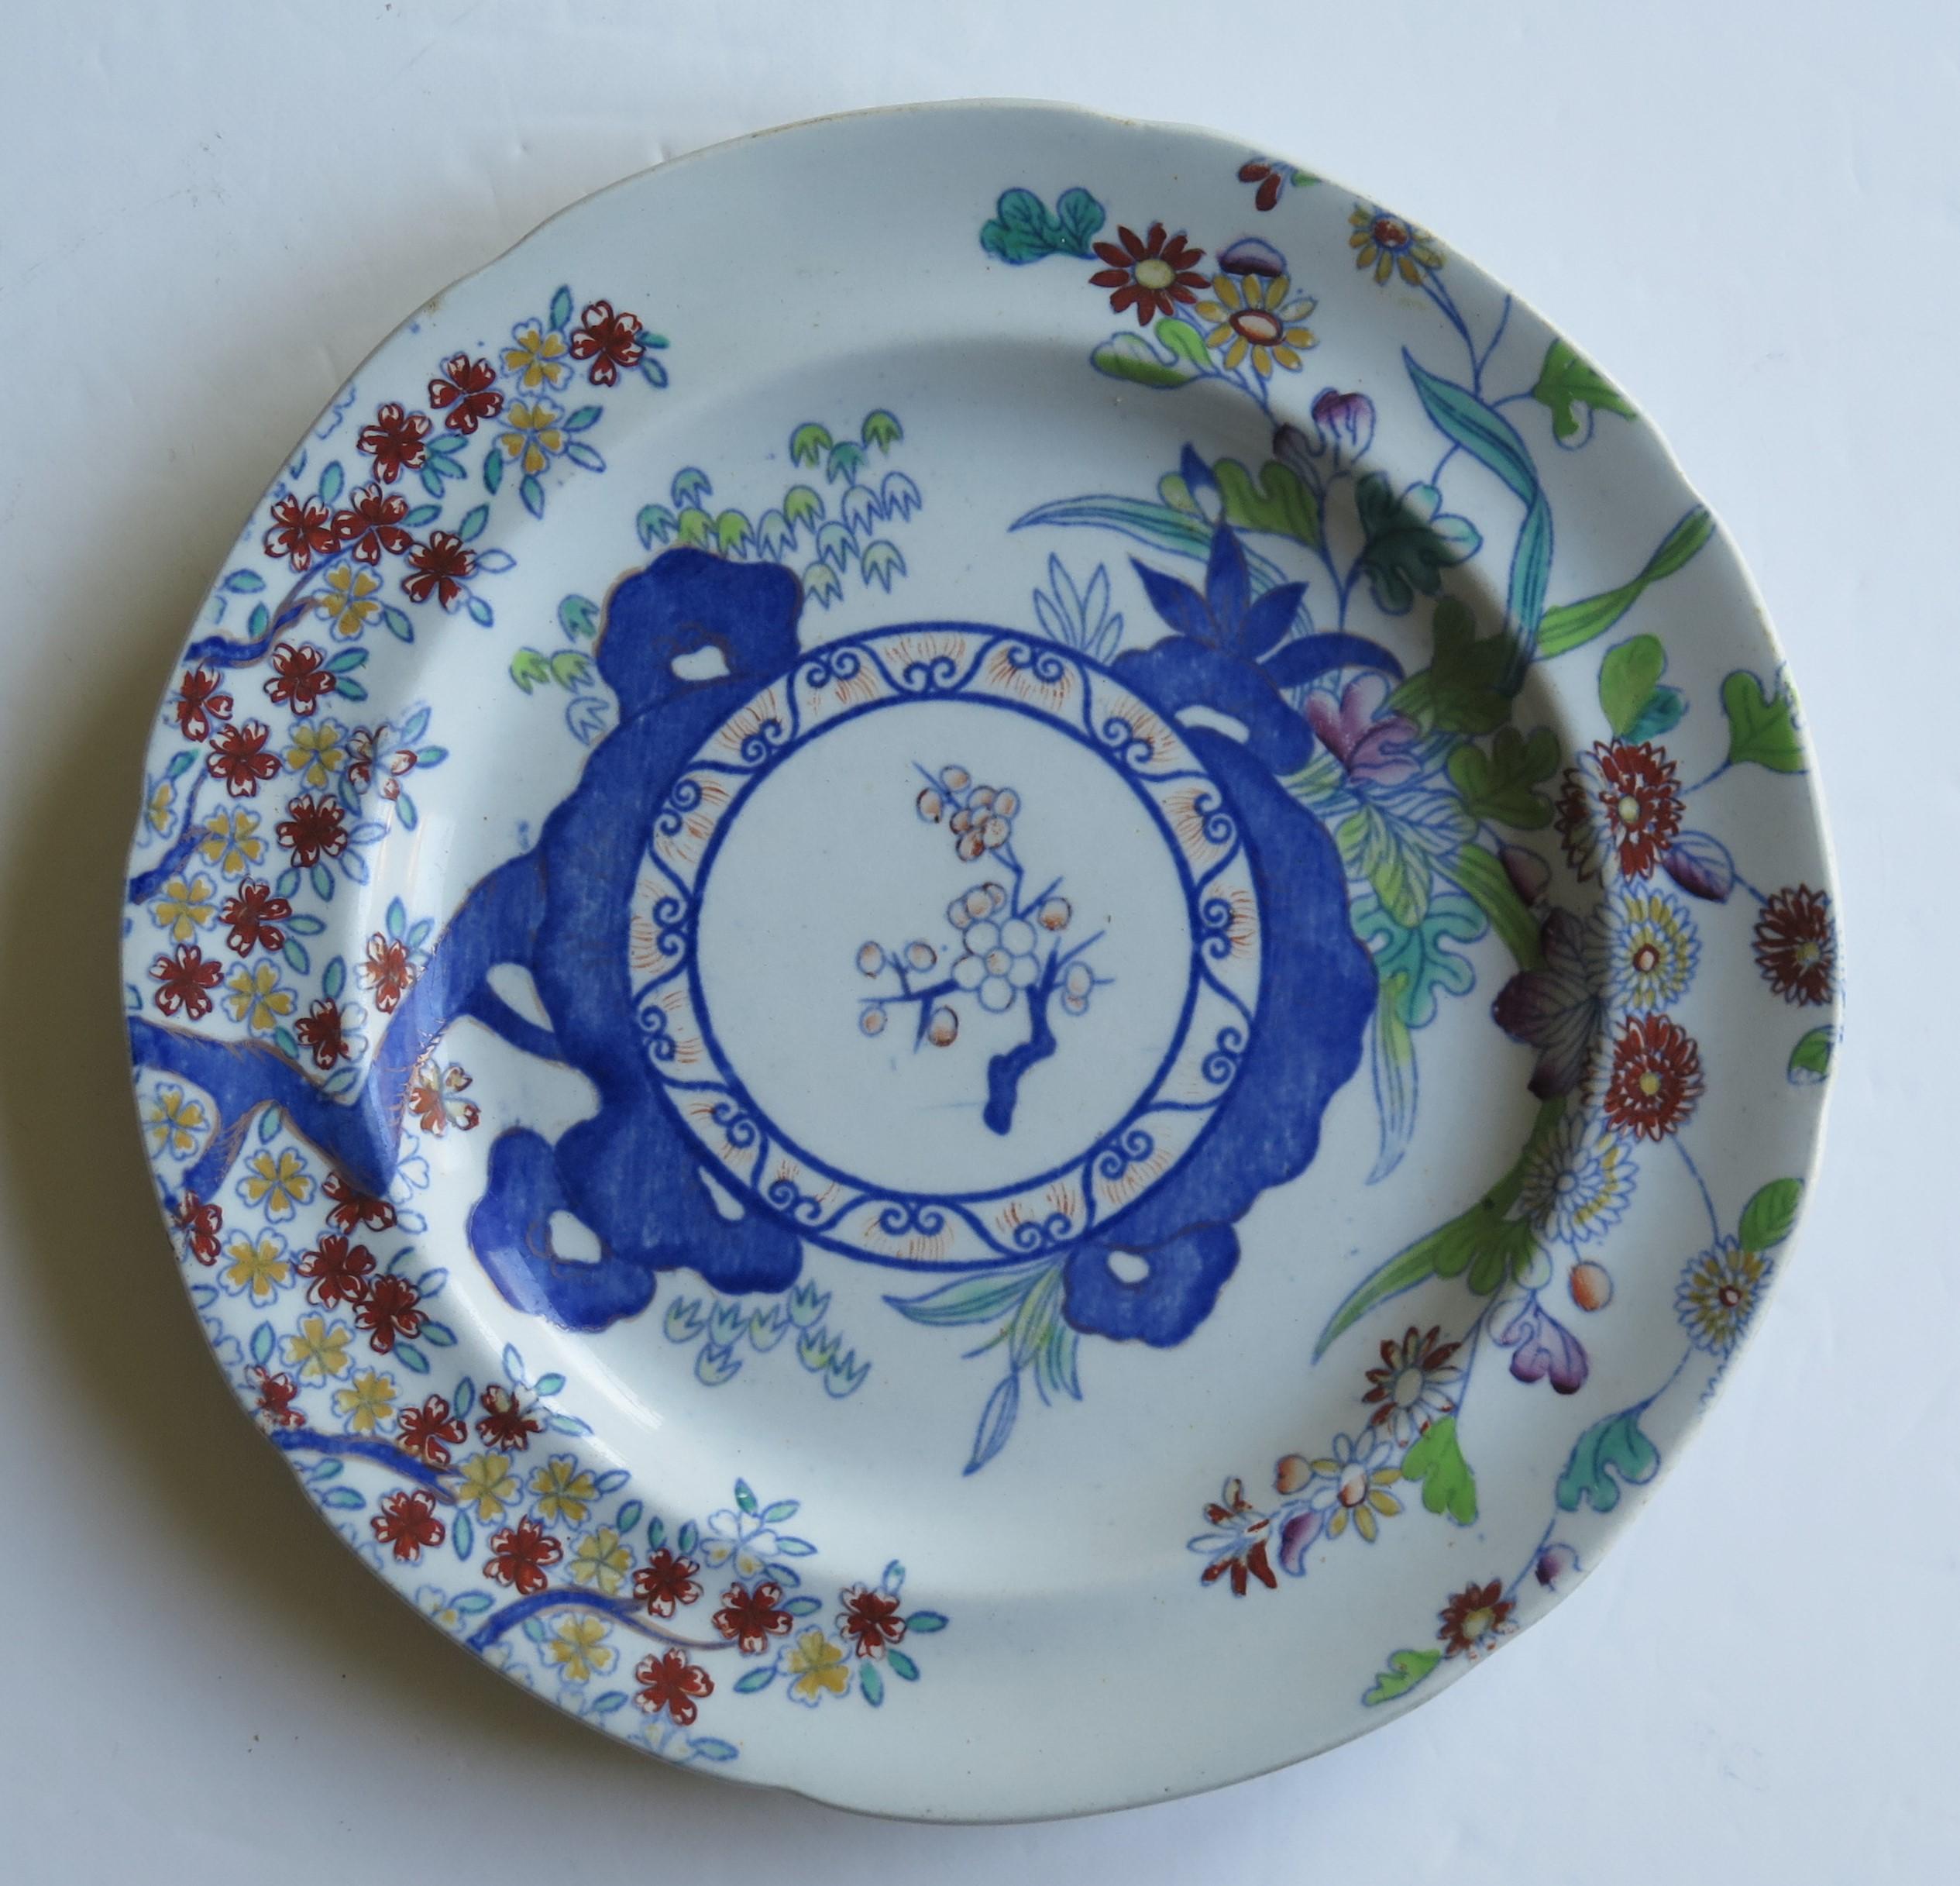 Plate by Copeland Late Spode in Japanese Kakiemon Pattern No. 2117, circa 1850 For Sale 2